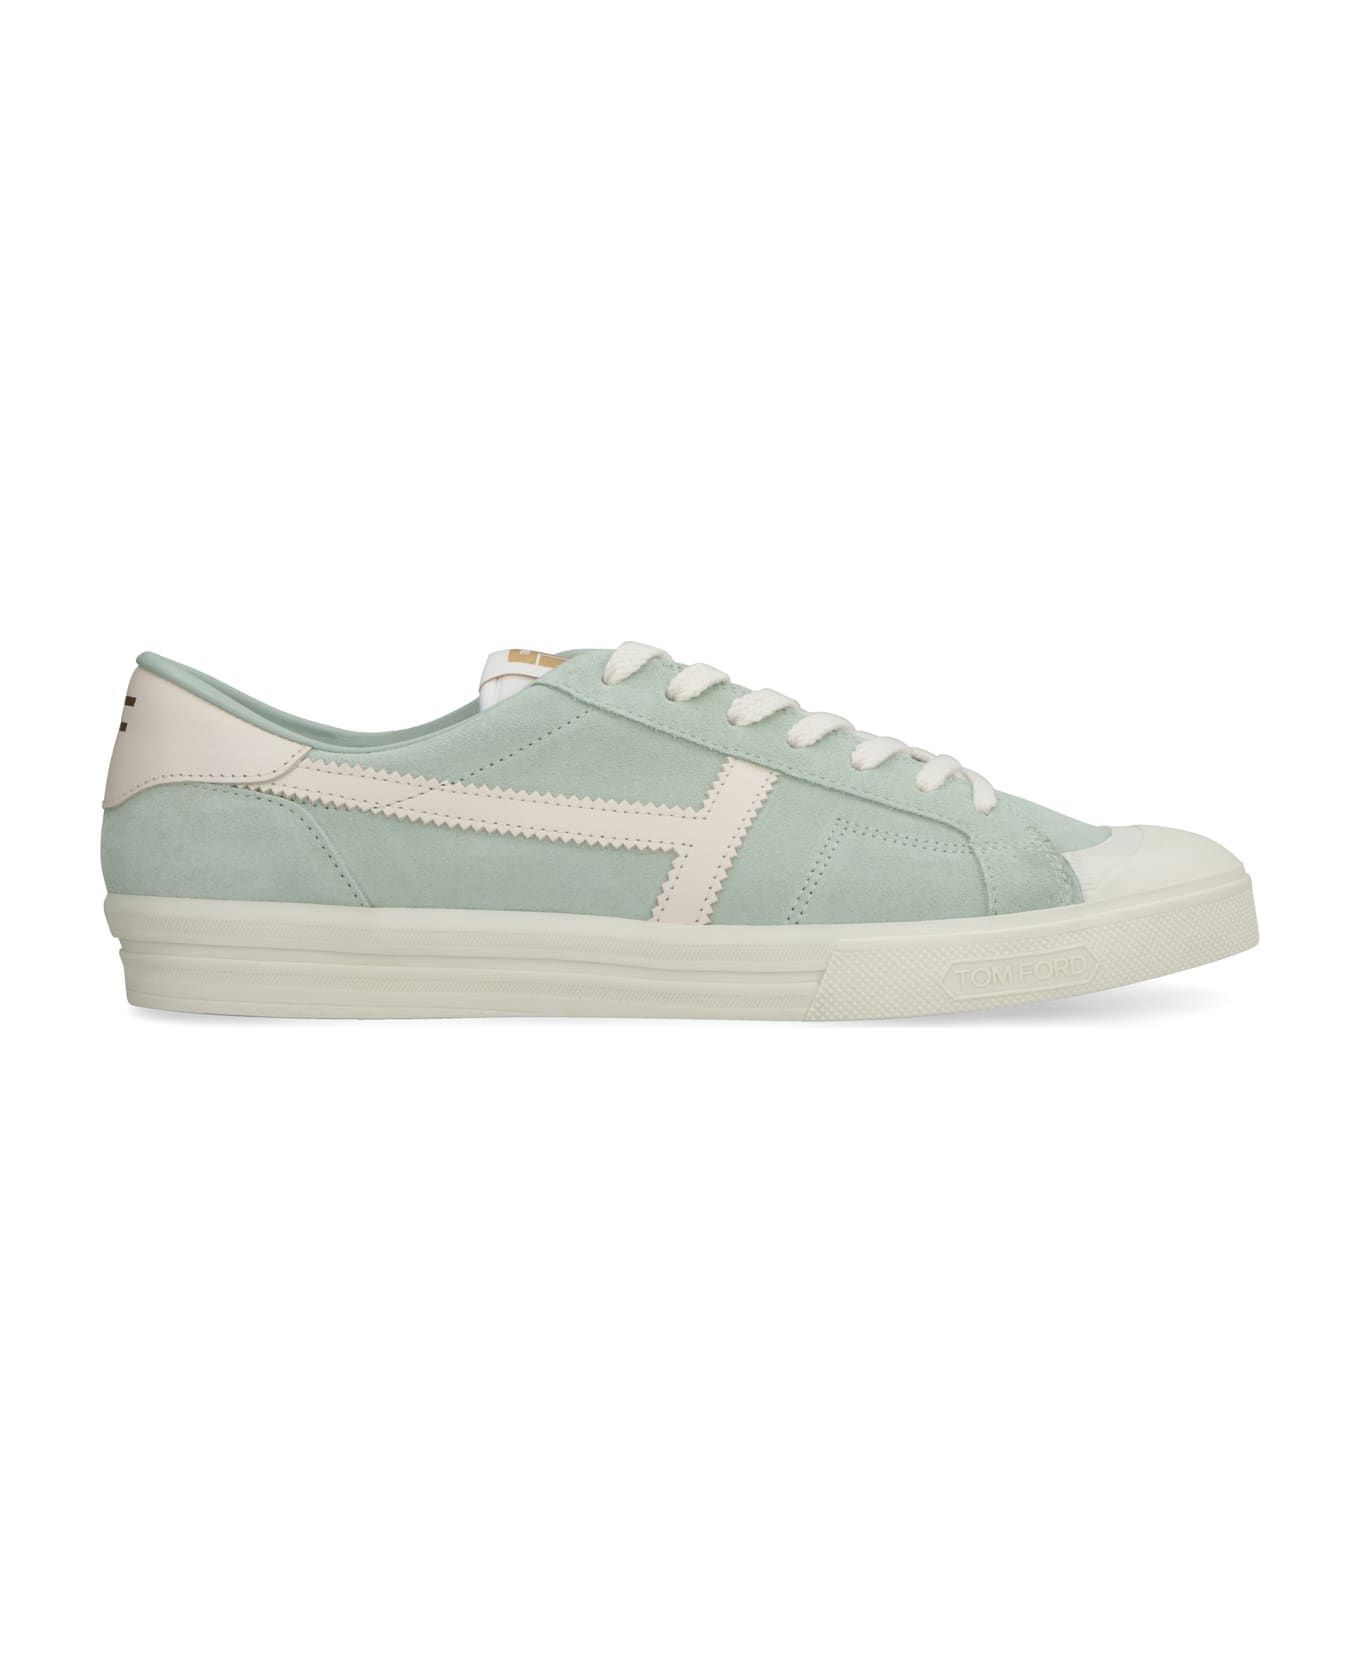 Tom Ford Jarvis Suede Sneakers - green